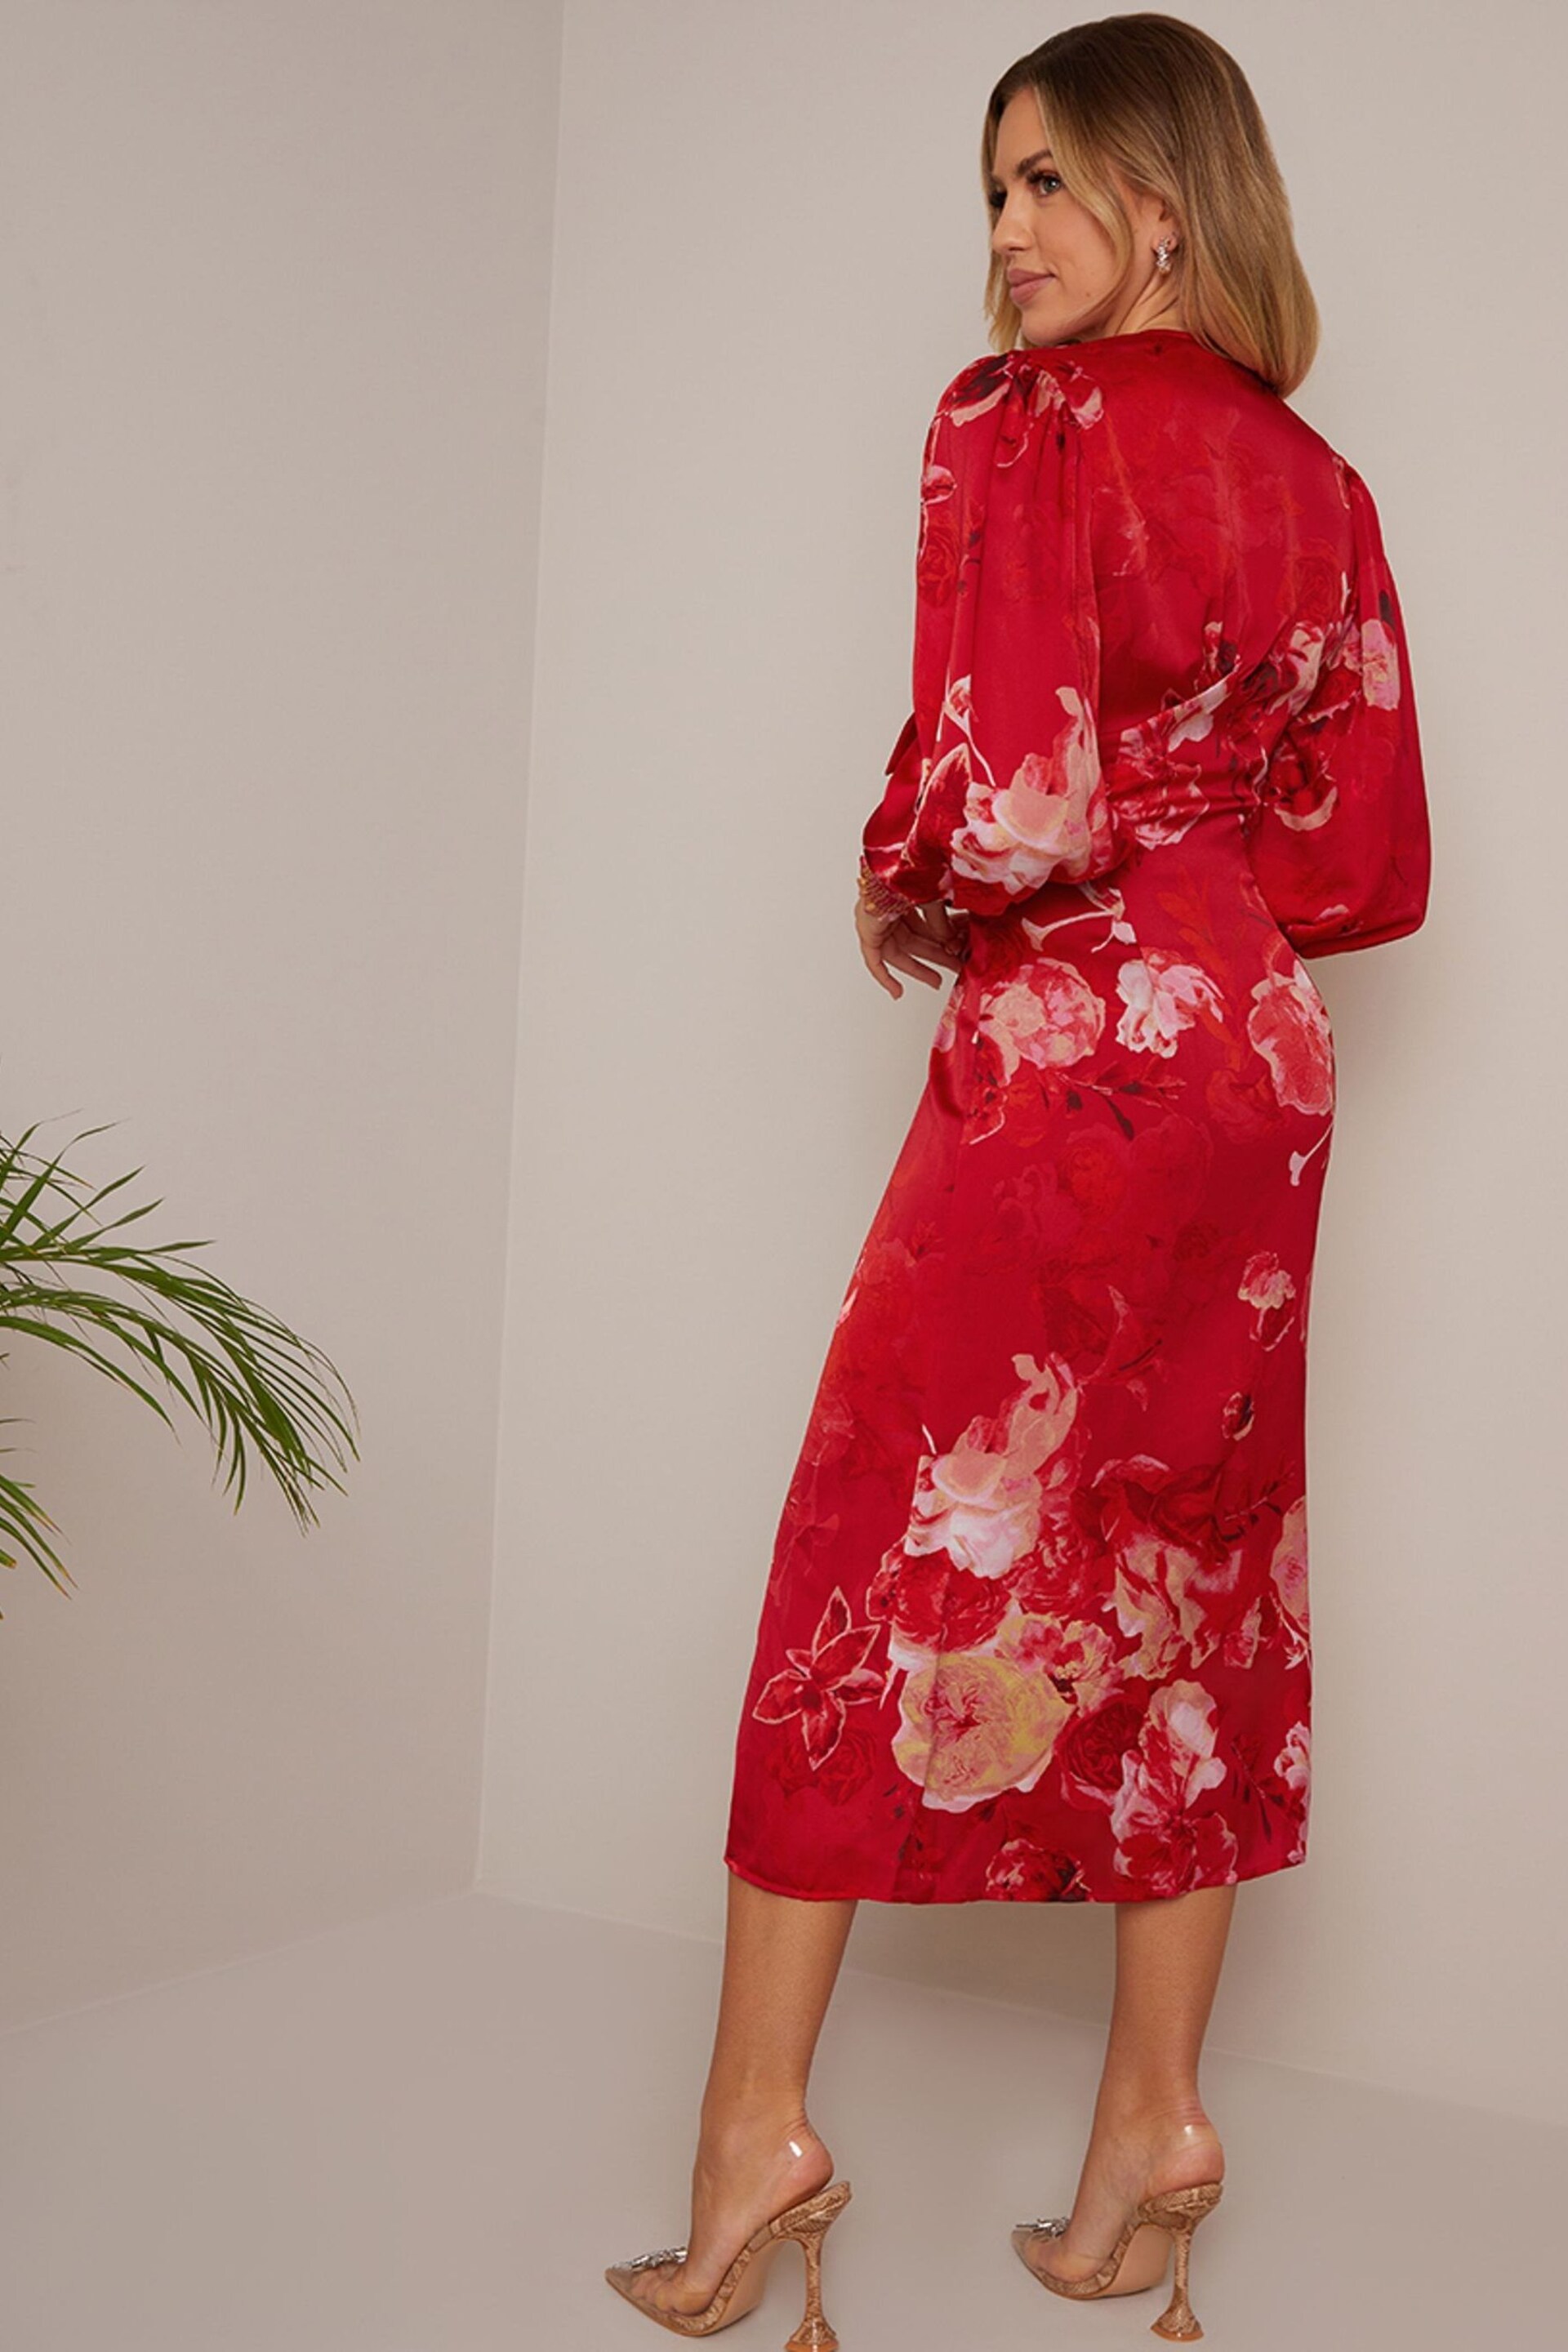 Chi Chi London Red V-Neck Puff Sleeve Floral Midi Dress - Image 2 of 3